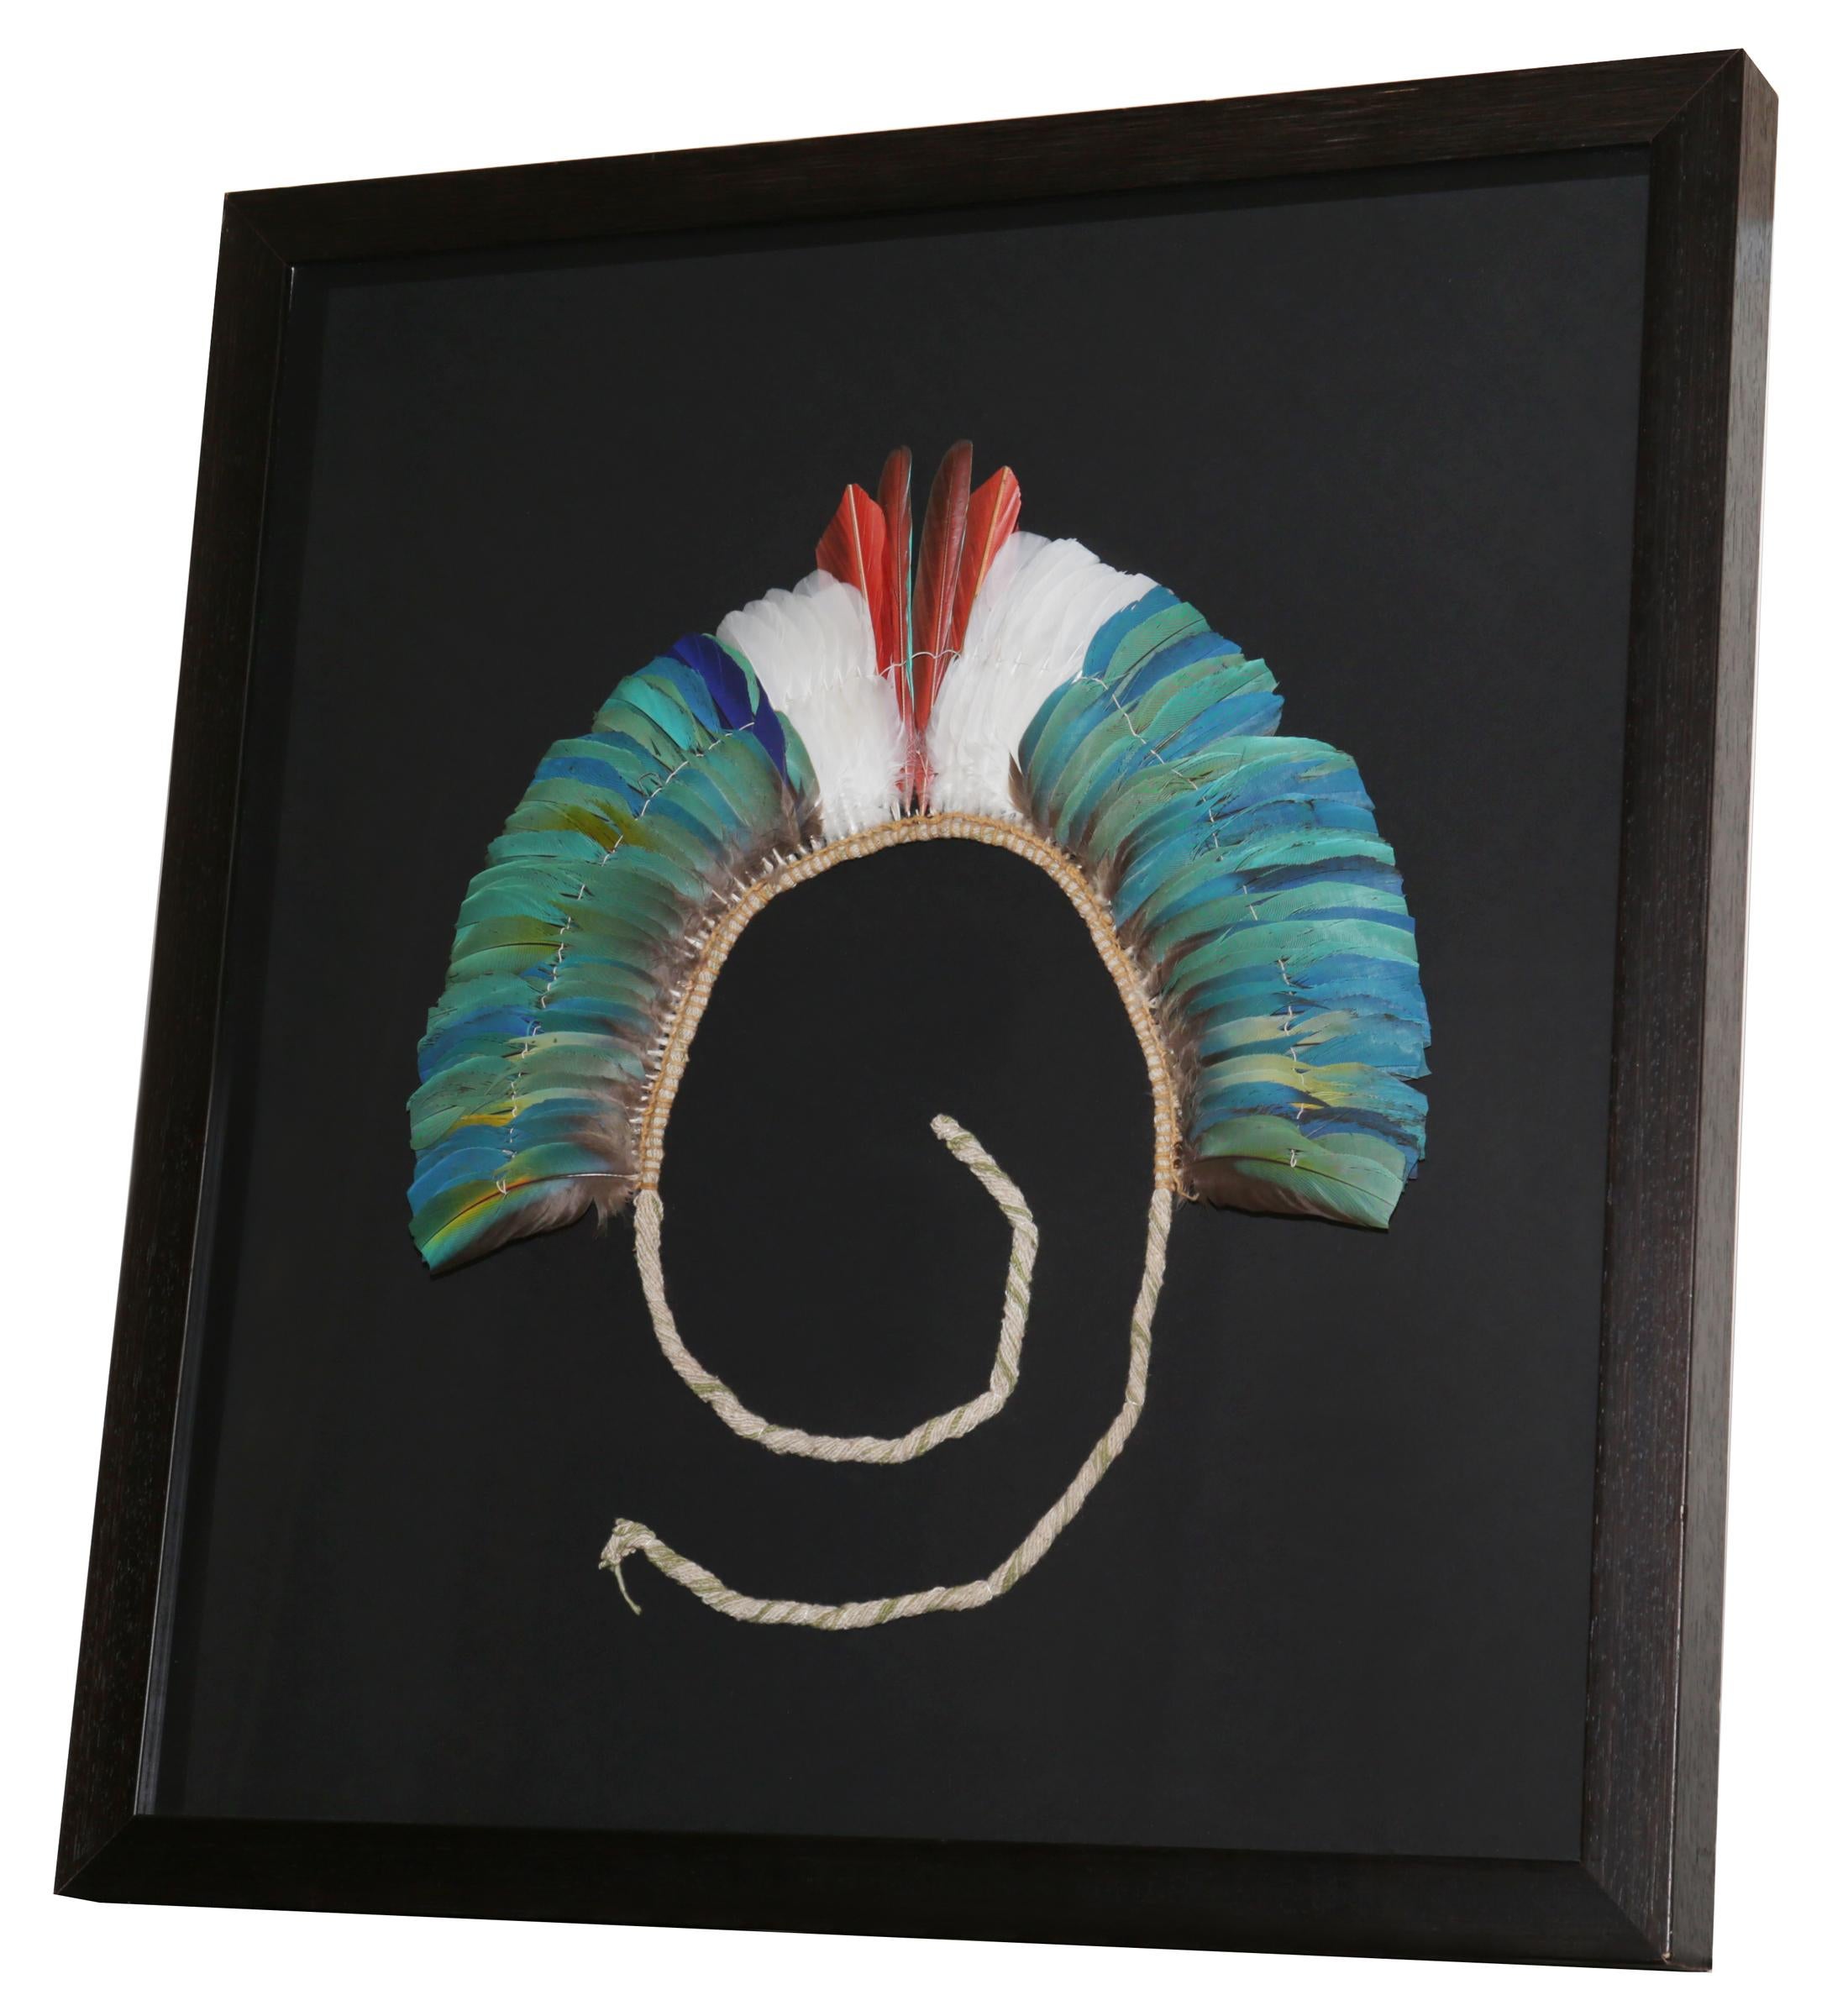 Headdress Kayapo 3 with natural feathers and
with cotton frame. Under glass with black wooden
frame. From Kayapo ethnic tribe, particularly from
Mekragnoti tribe. From Rio Chiche, southeast Para
state in Brazil. Pieces collected by Sir André